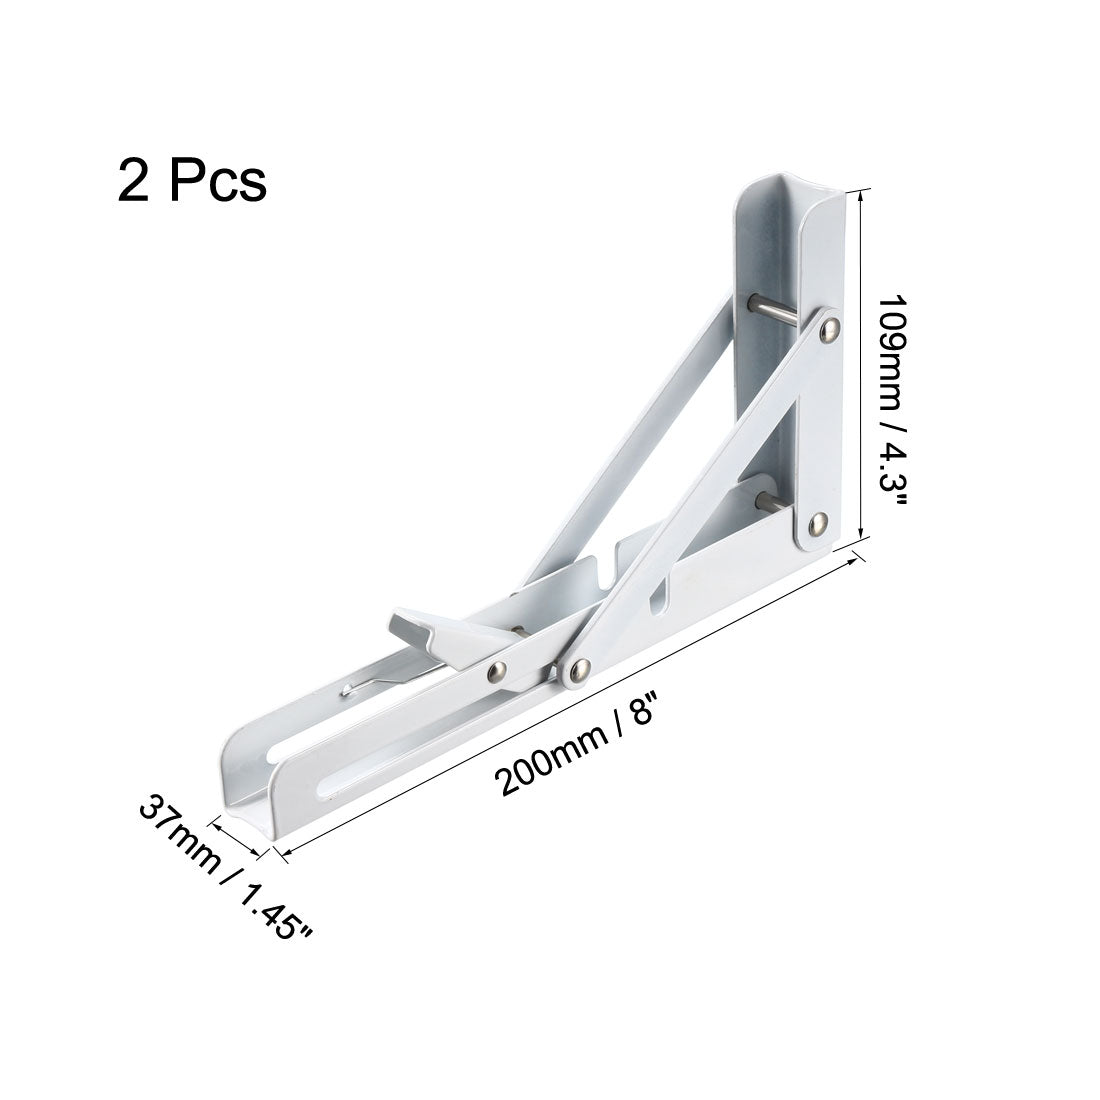 uxcell Uxcell Folding Bracket 8 inch 200mm for Shelf Table Desk Wall Mounted Support Collapsible Long Release Arm Space Saving Carbon Steel 2pcs